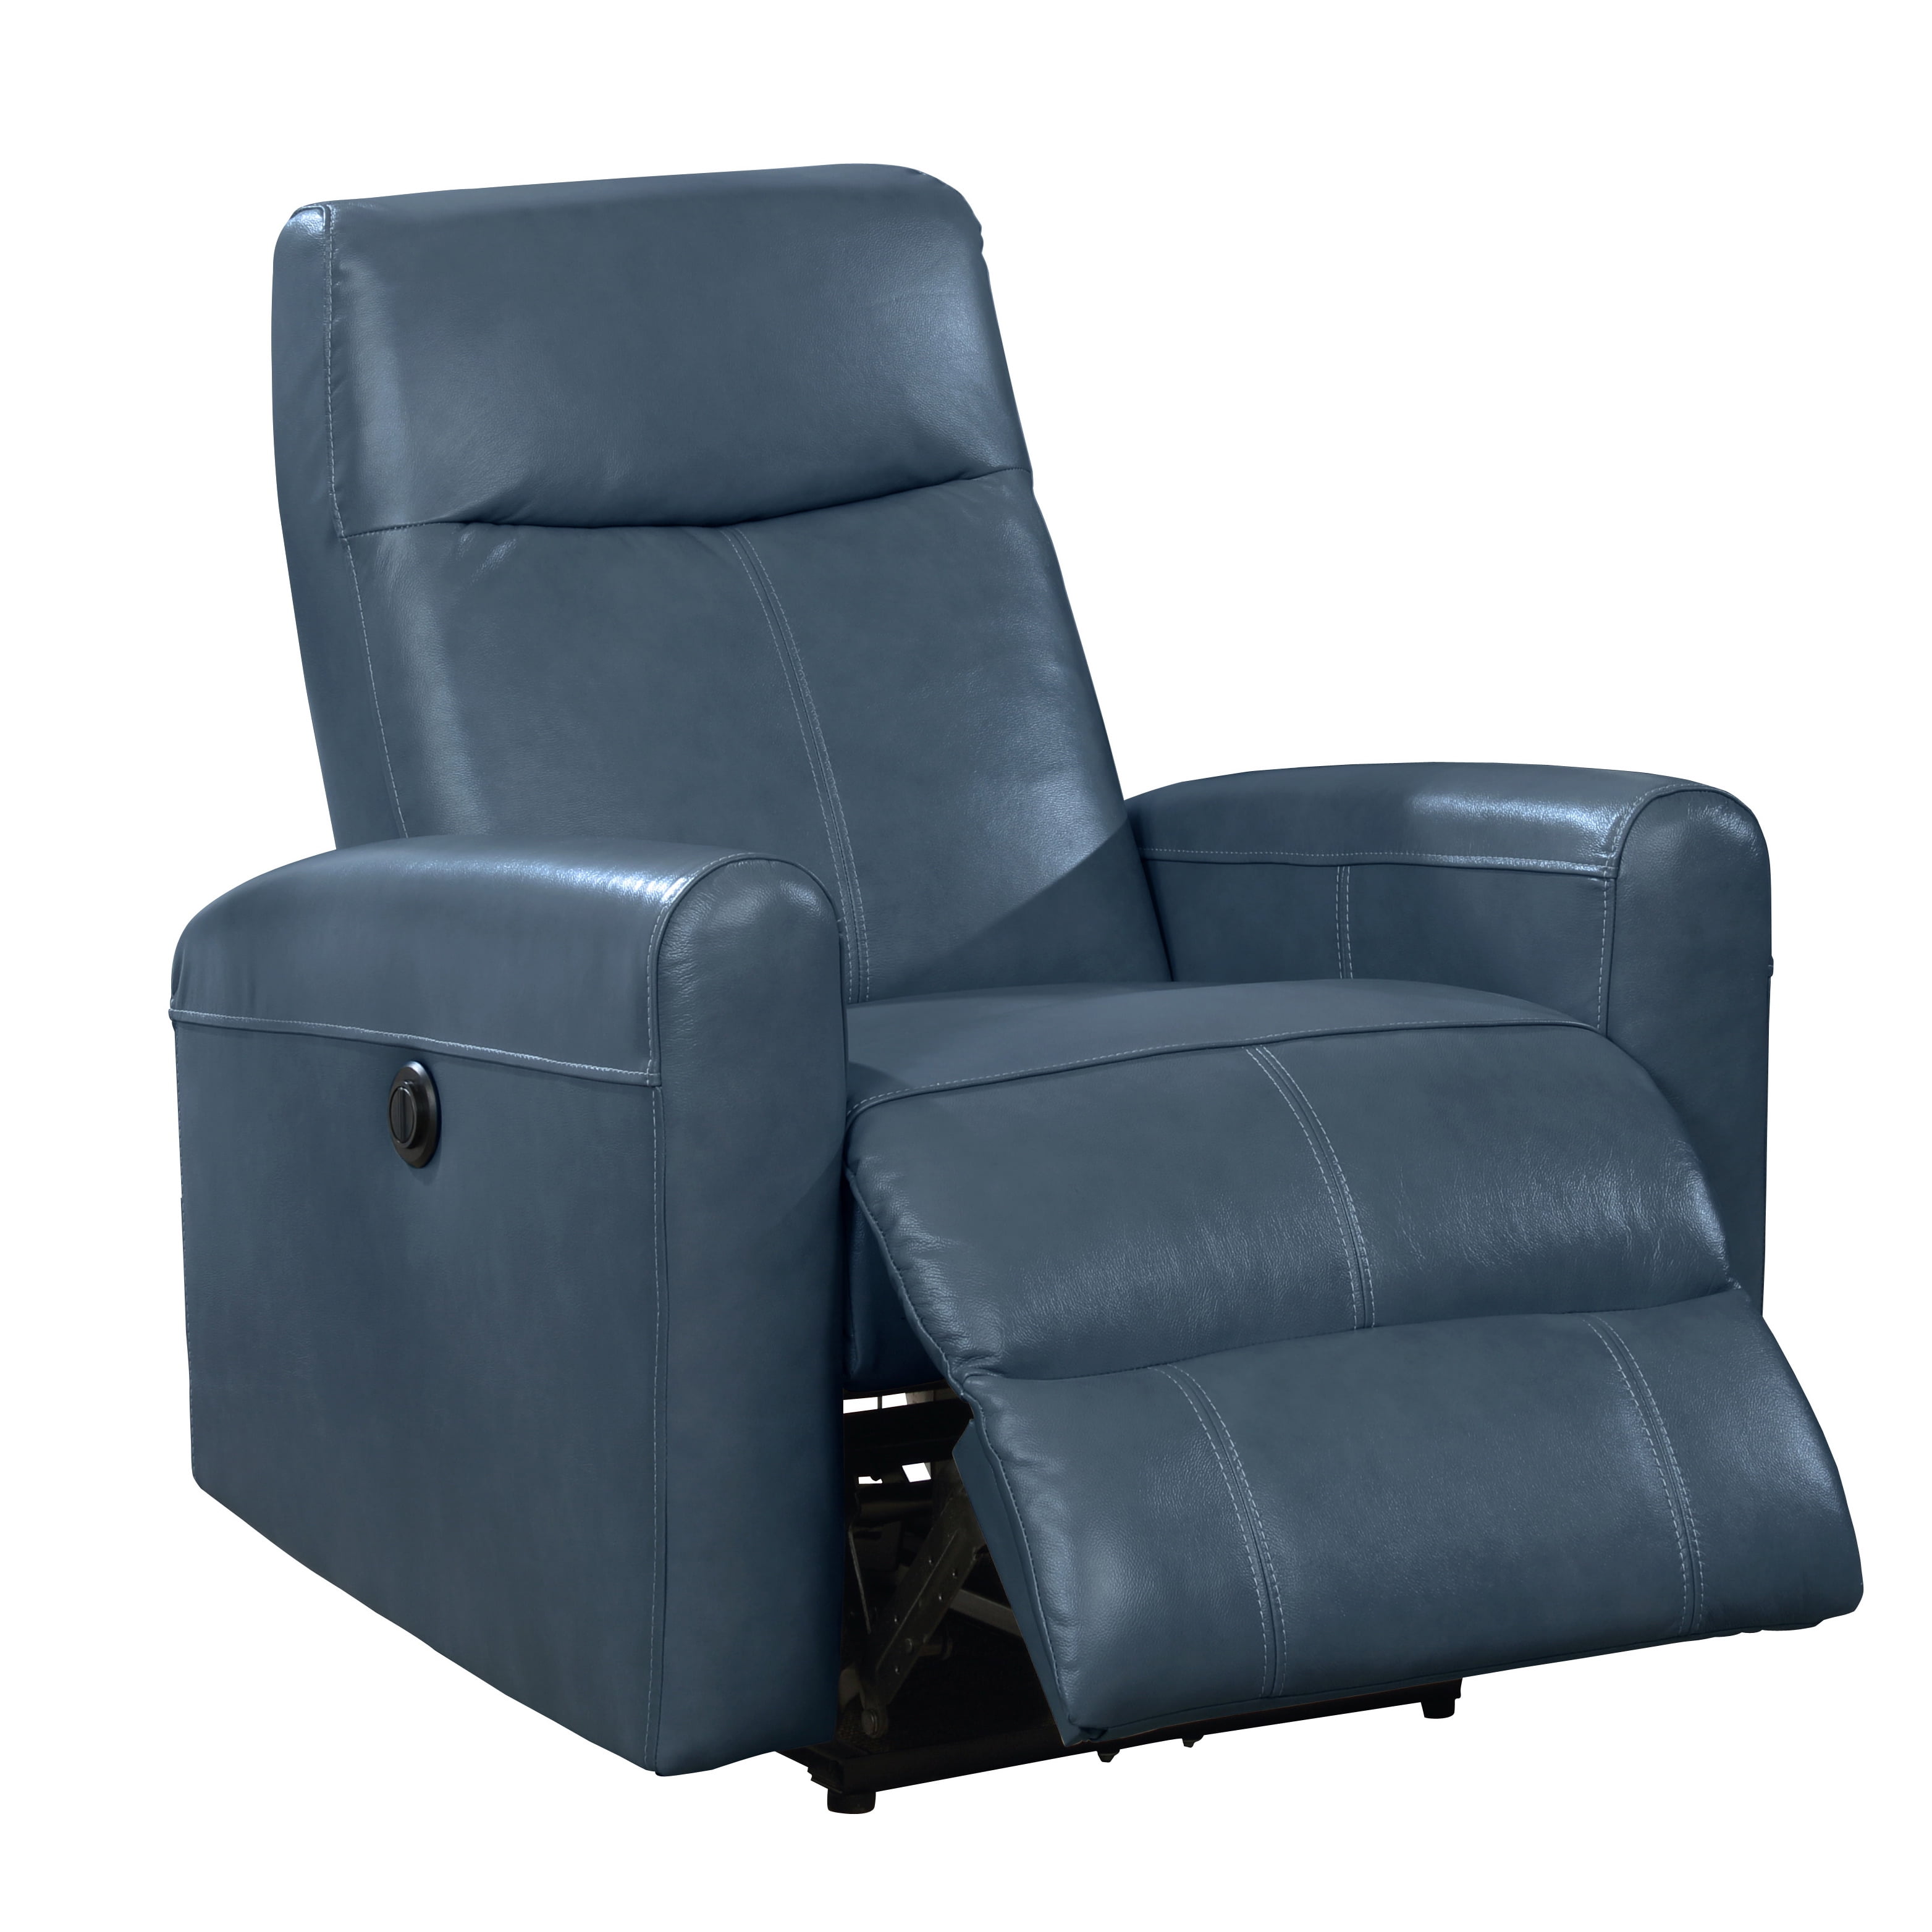 AC Pacific Power Recliner Eli Leather Upholstered Chair, Navy Blue